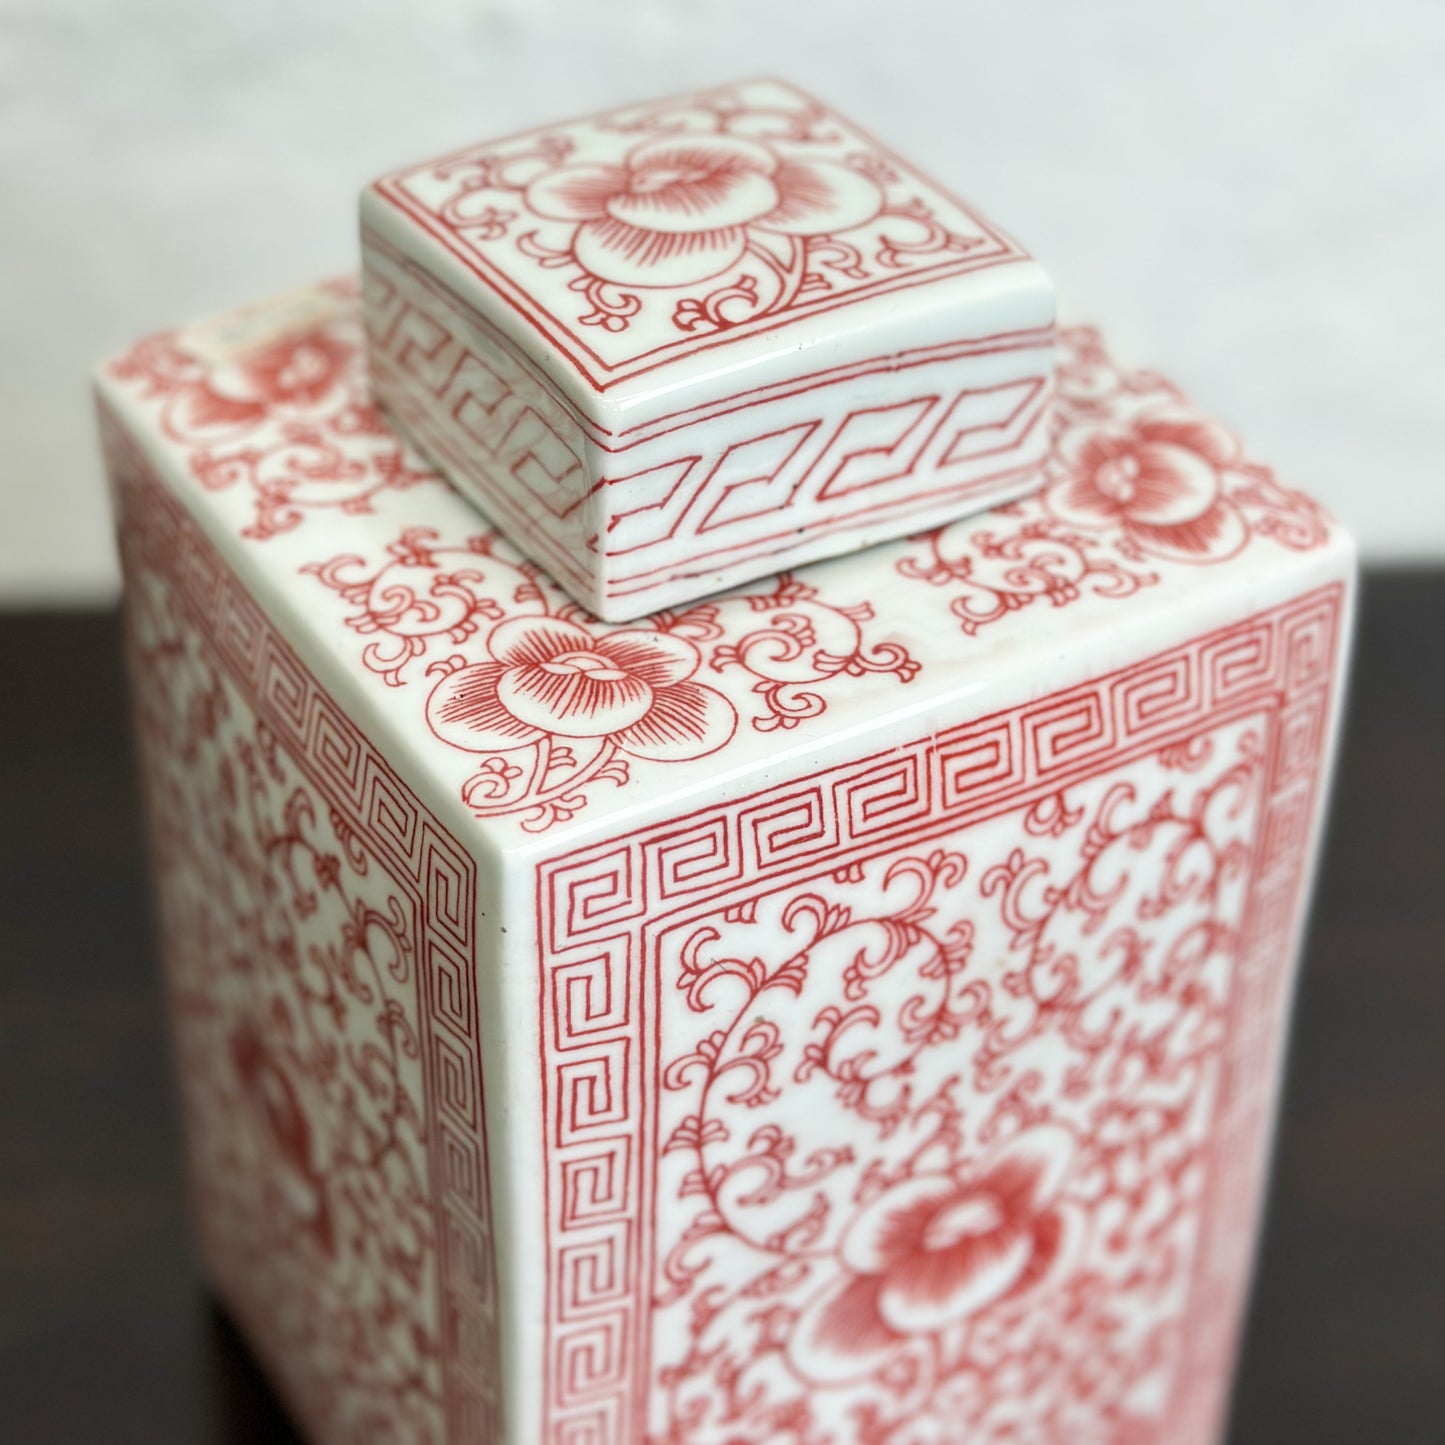 Chinese-Porcelain-Square-Tea-Container-Vermillion-Red-and-White-Prunus-Flower-Vines4